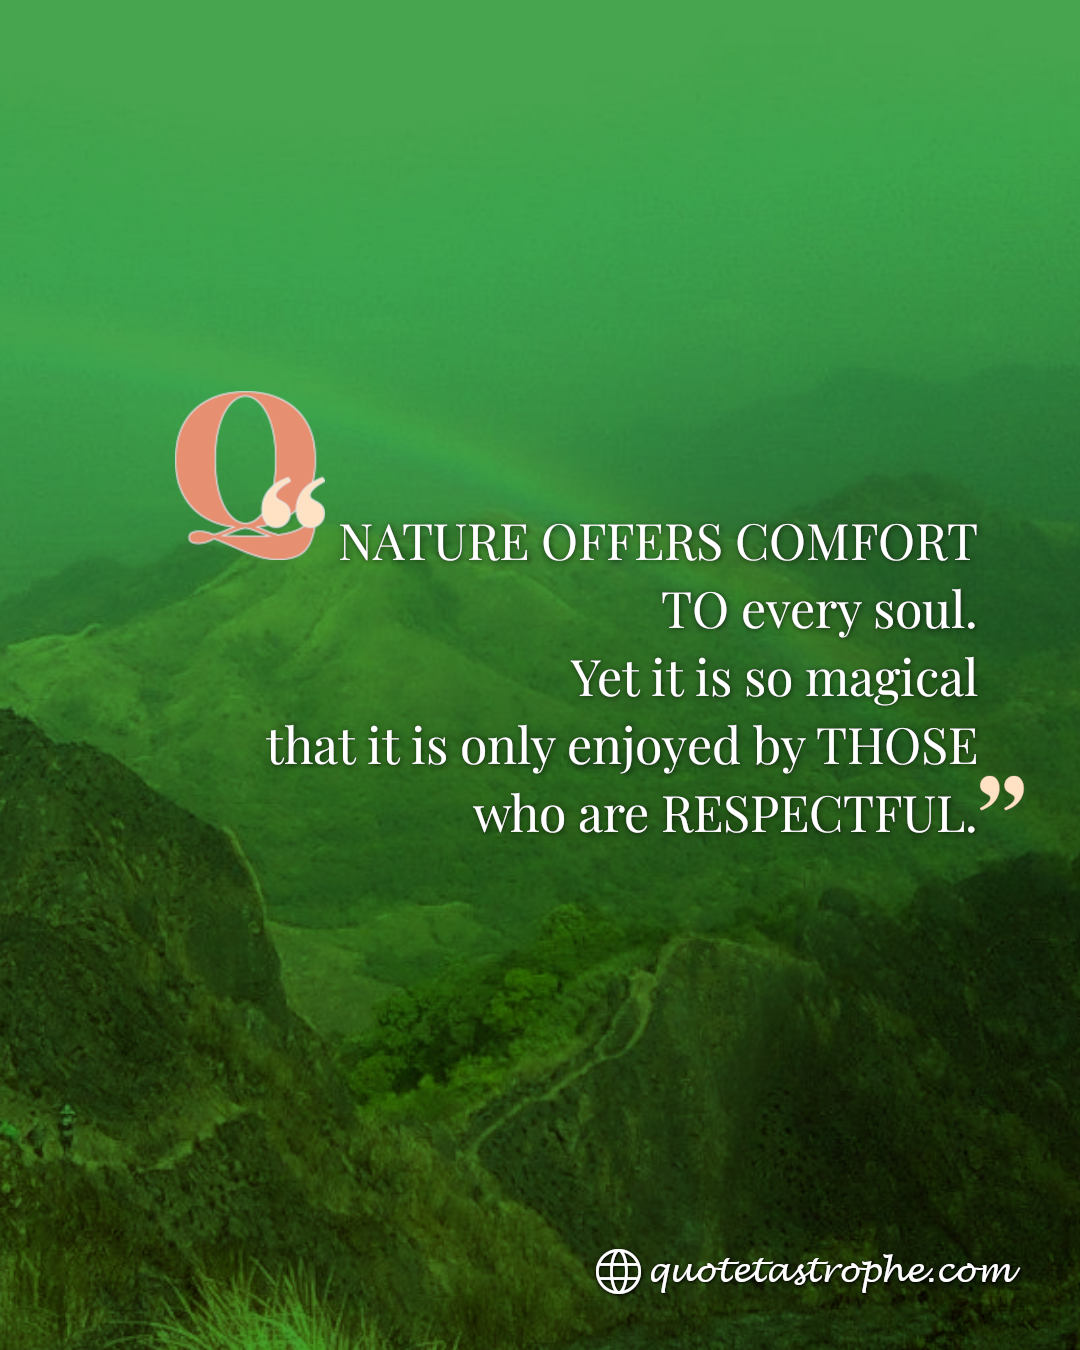 Nature is Only Enjoyed by Those Who are Respectful